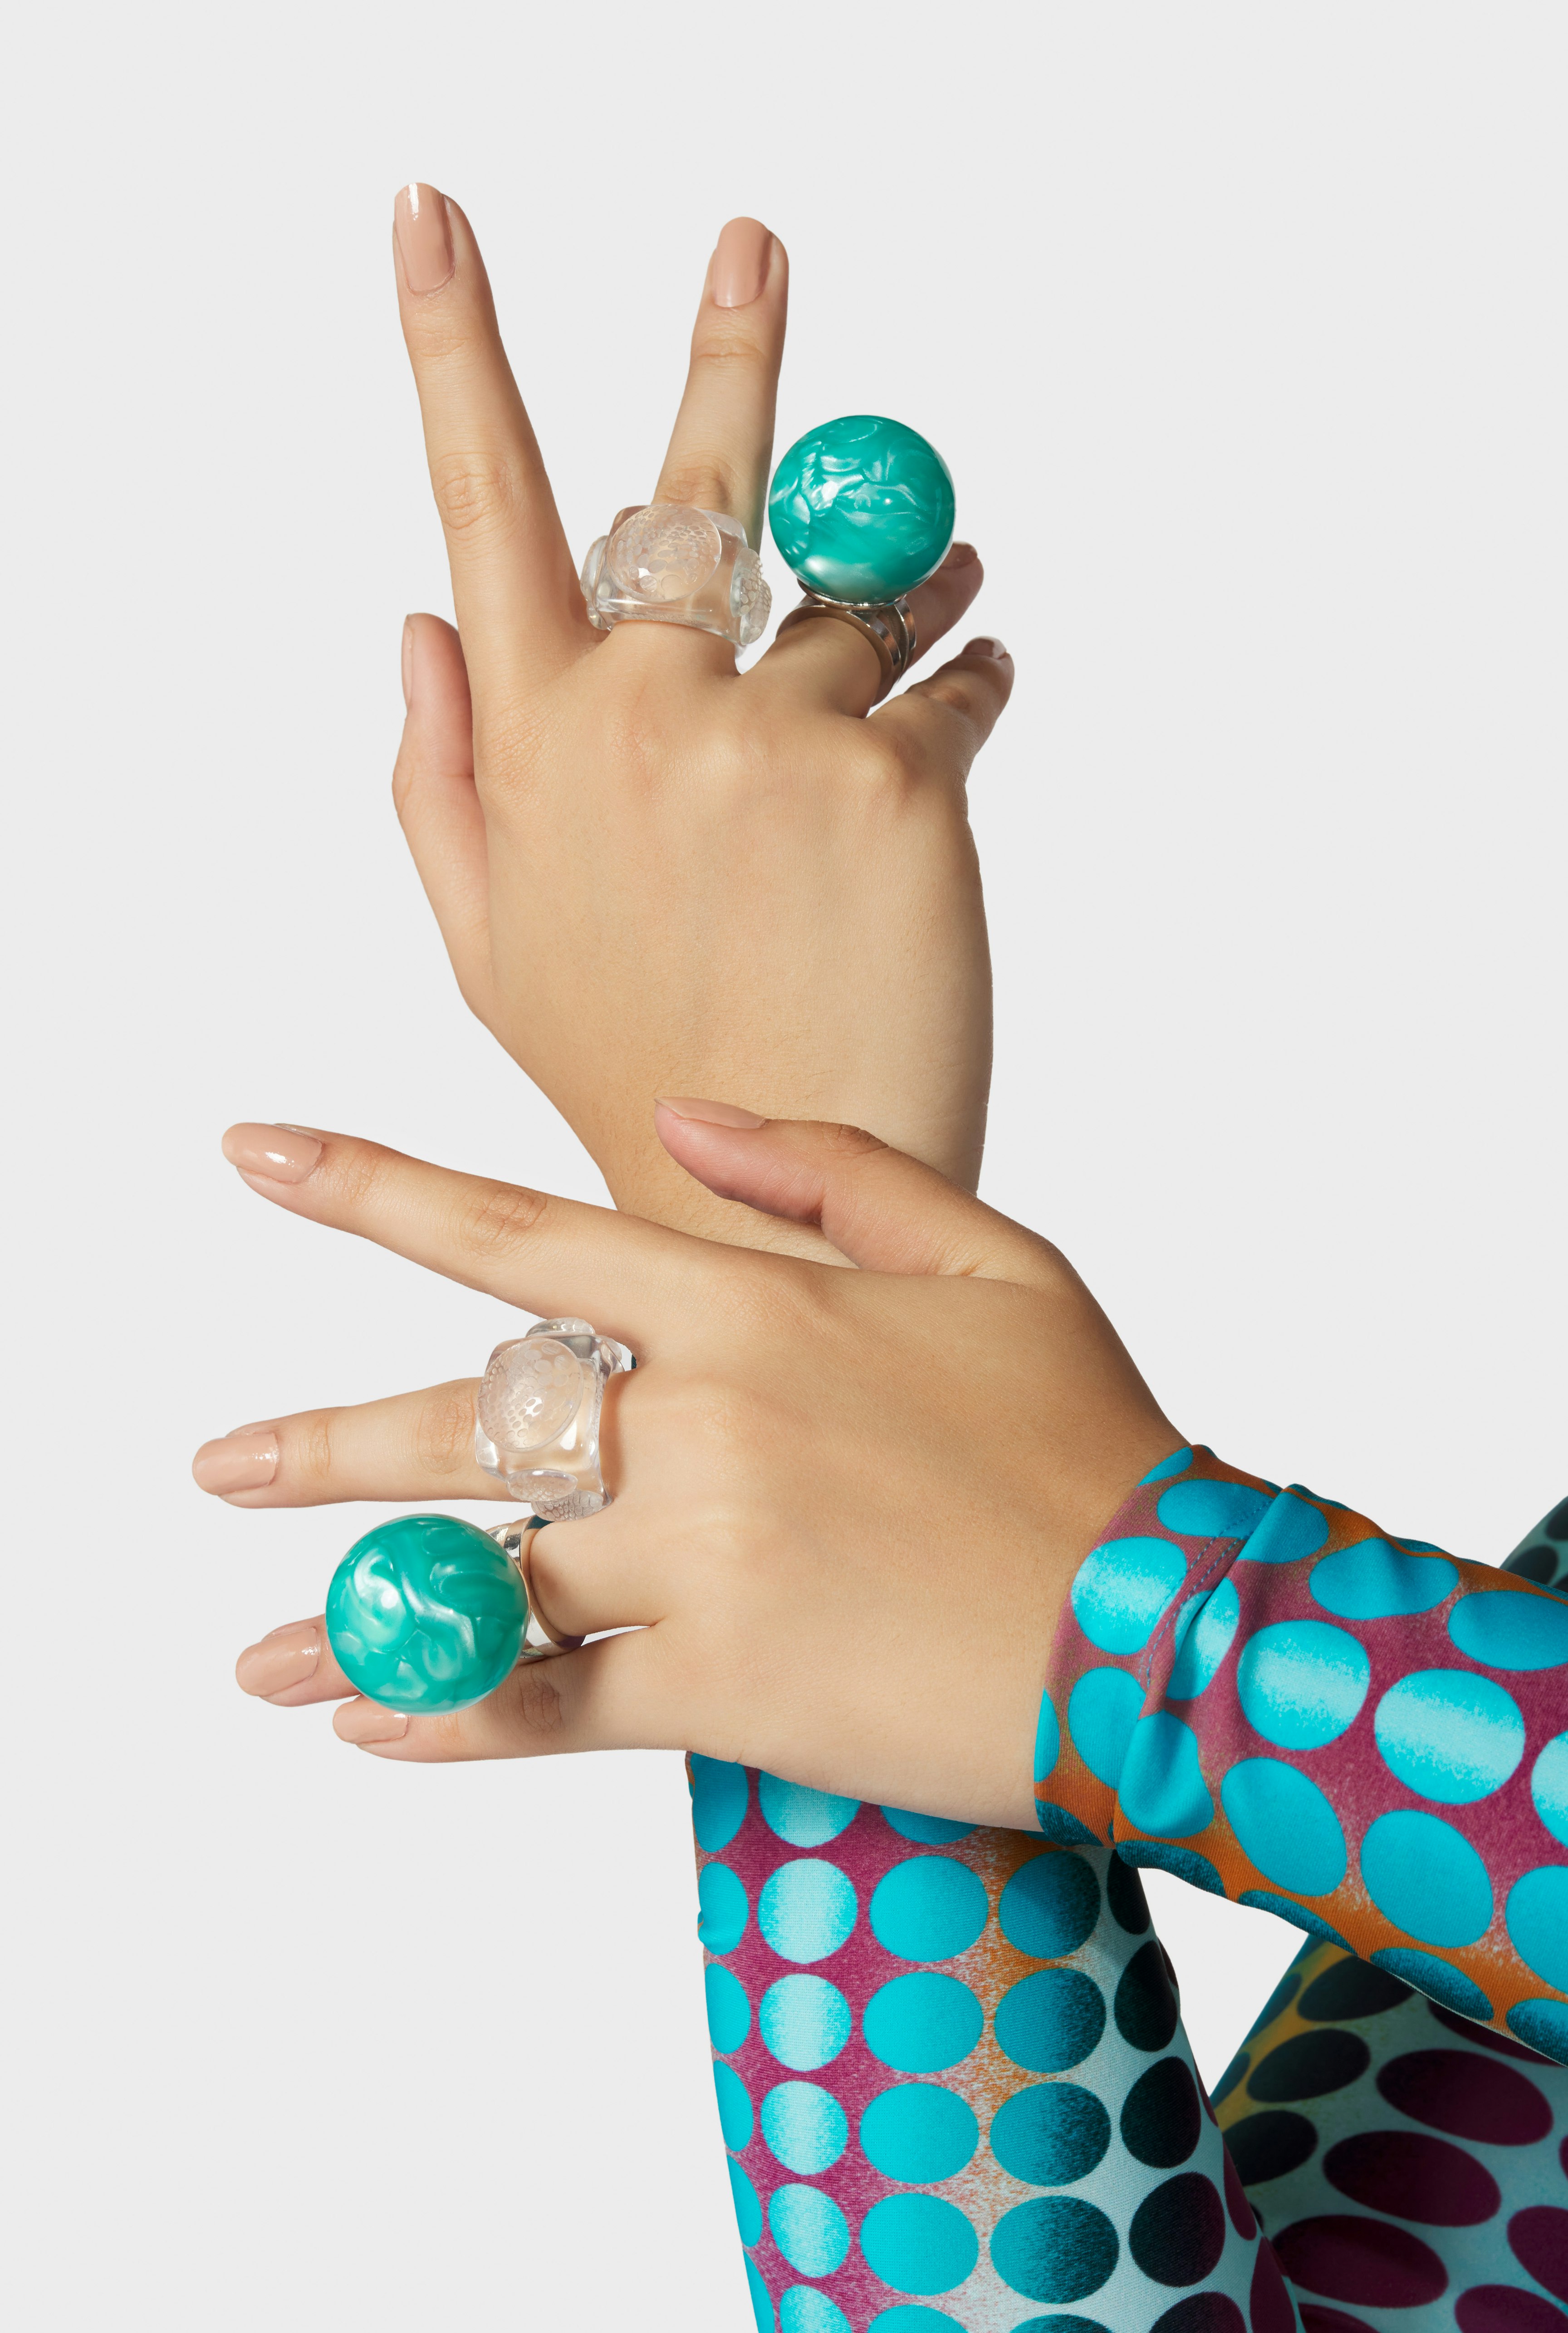 The Turquoise Cyber Ball Ring Jean Paul Gaultier